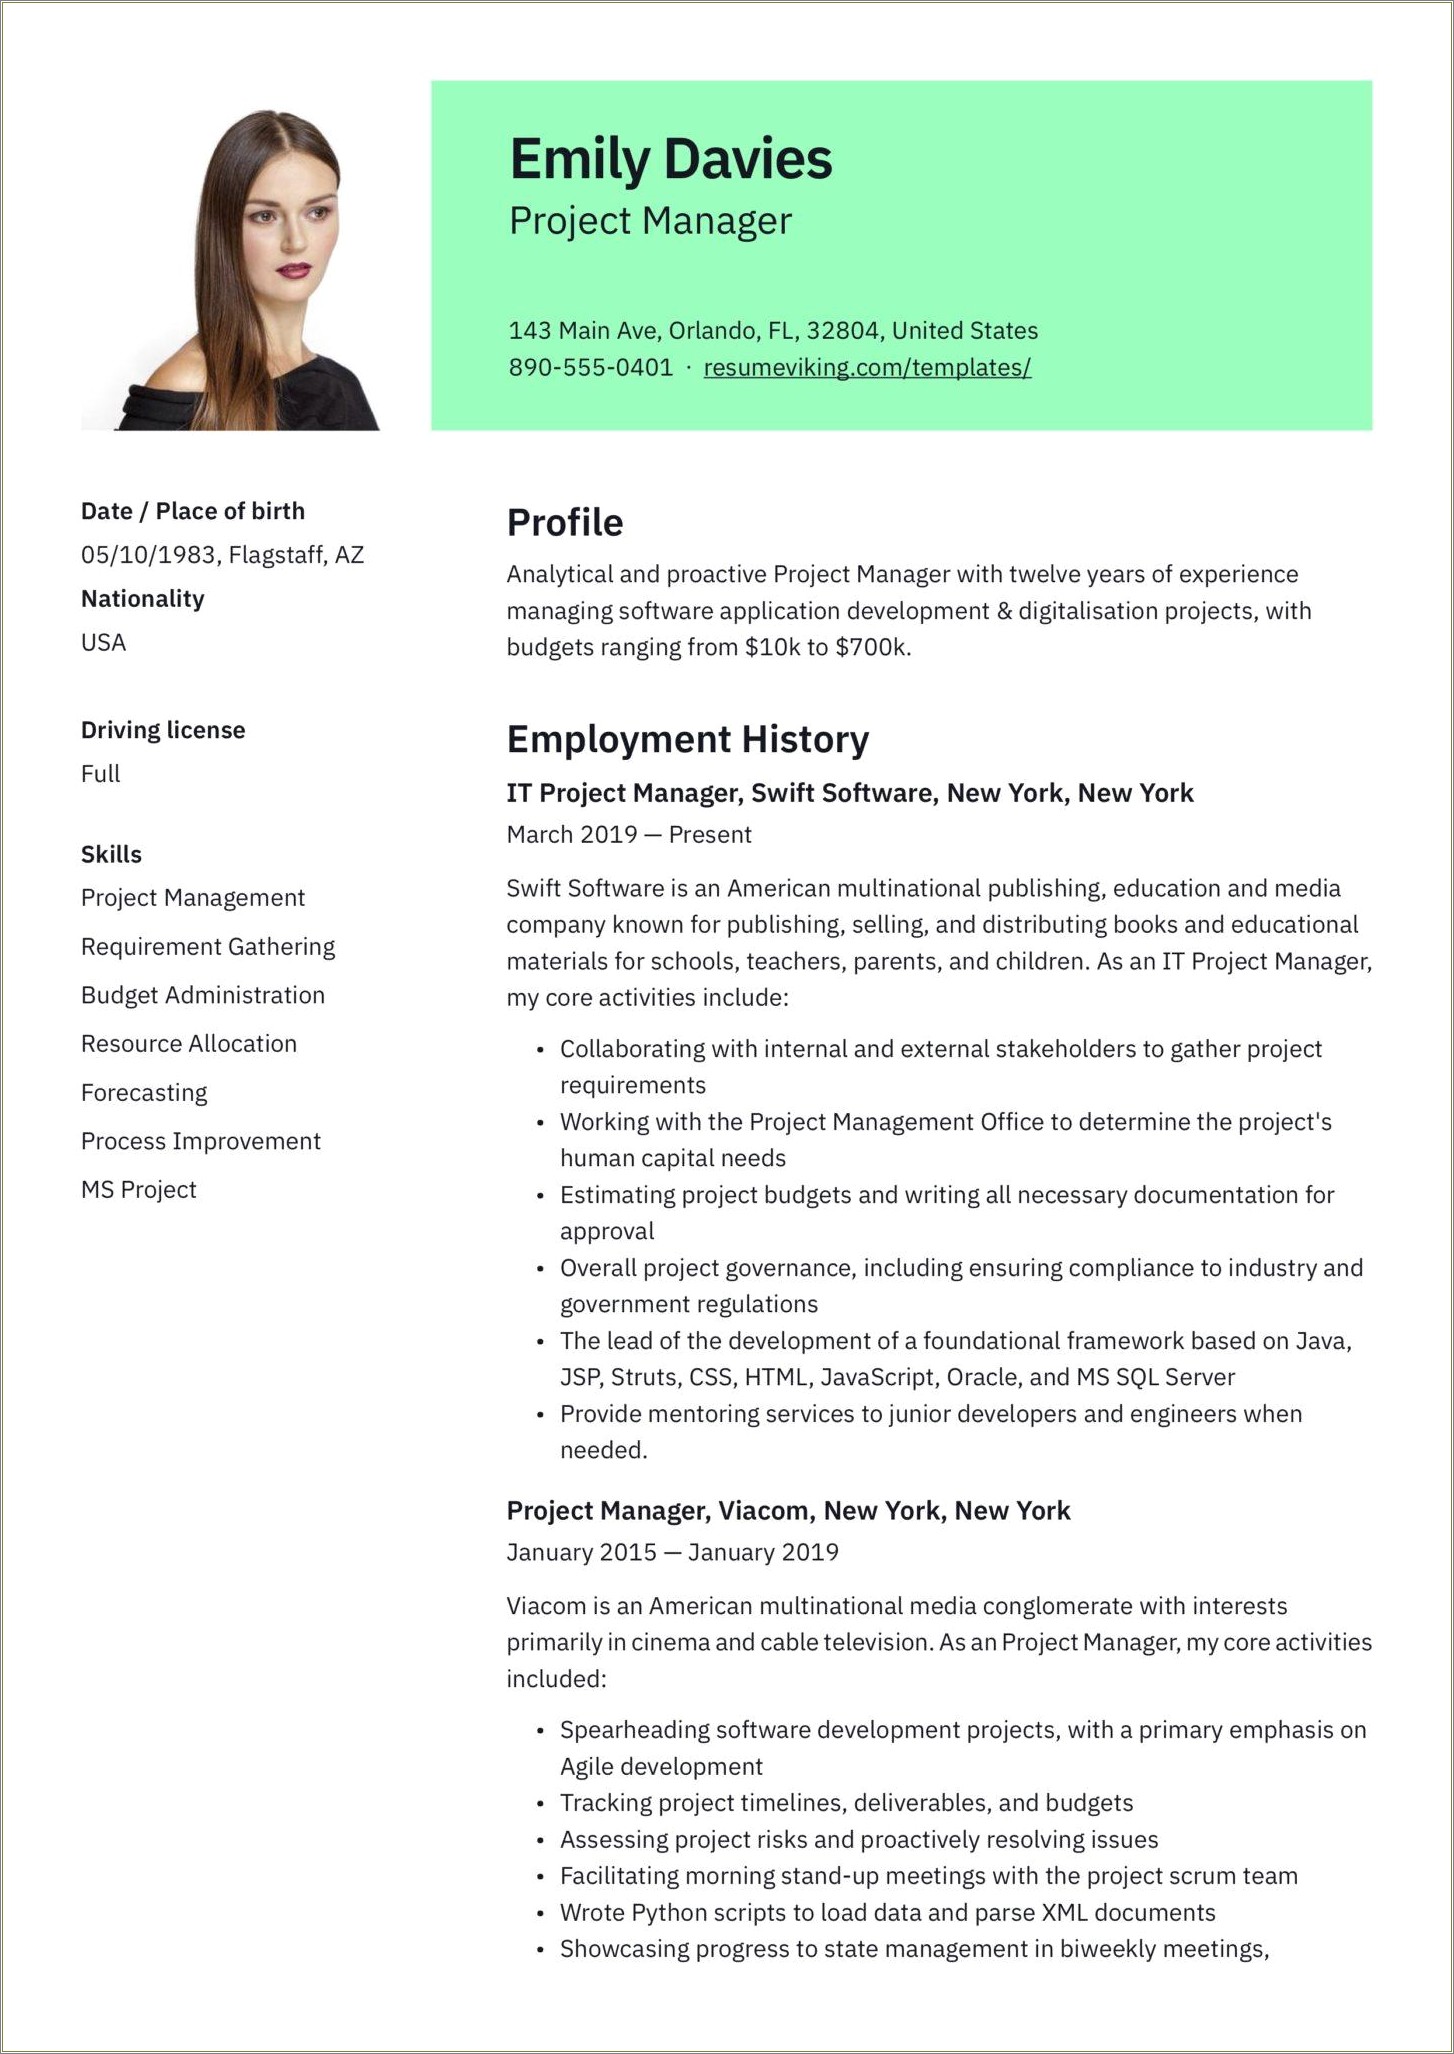 Best Healthcare Senior Project Manager Resume